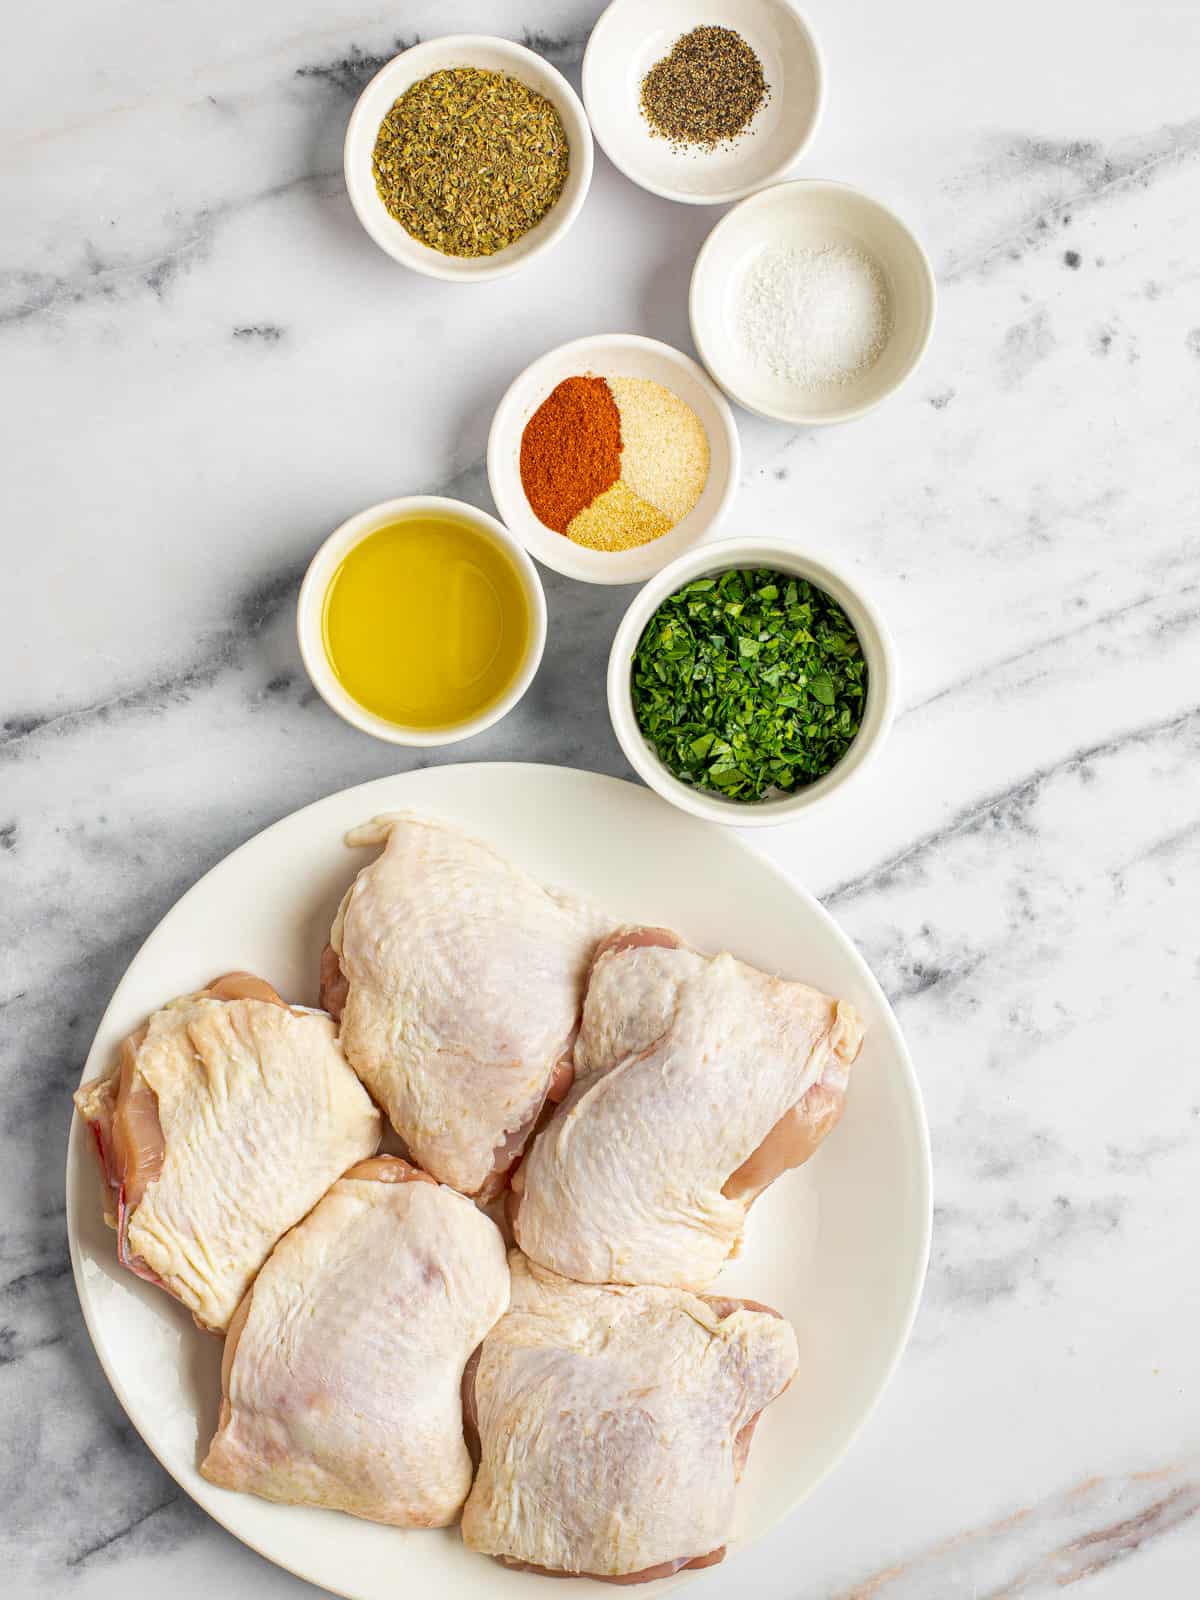 White marble counter top with bowls of ingredients to make juicy baked chicken thighs.